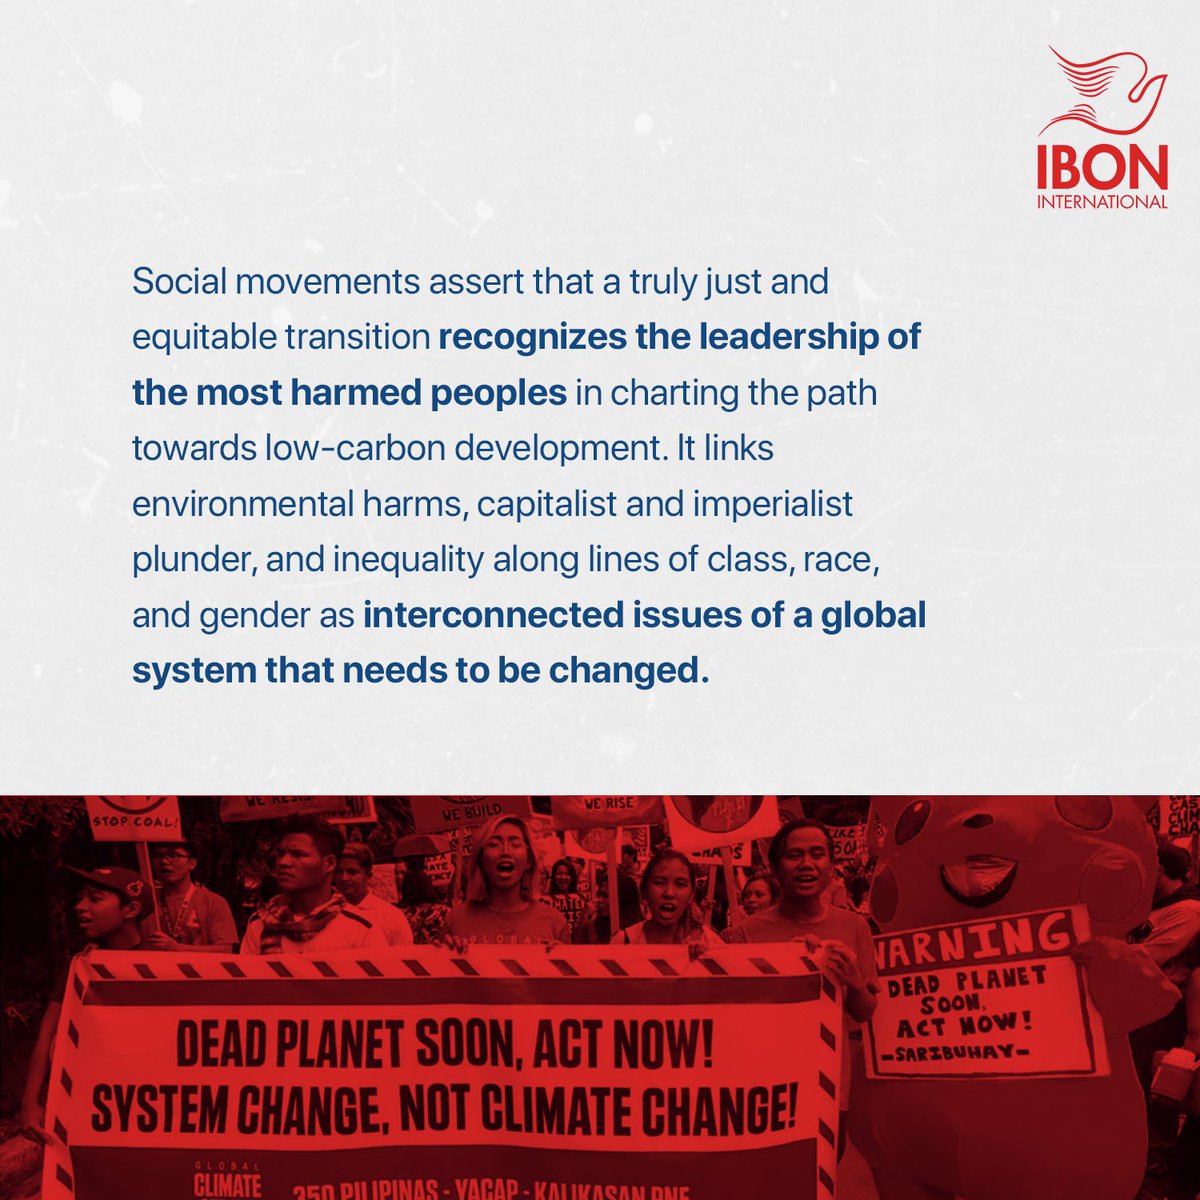 Social movements assert that a truly just and equitable transition recognizes the leadership of the most harmed peoples in charting the path towards low-carbon development, linking environmental harms, capitalist plunder, and inequality as systemic issues. #JustTransition (4/4)